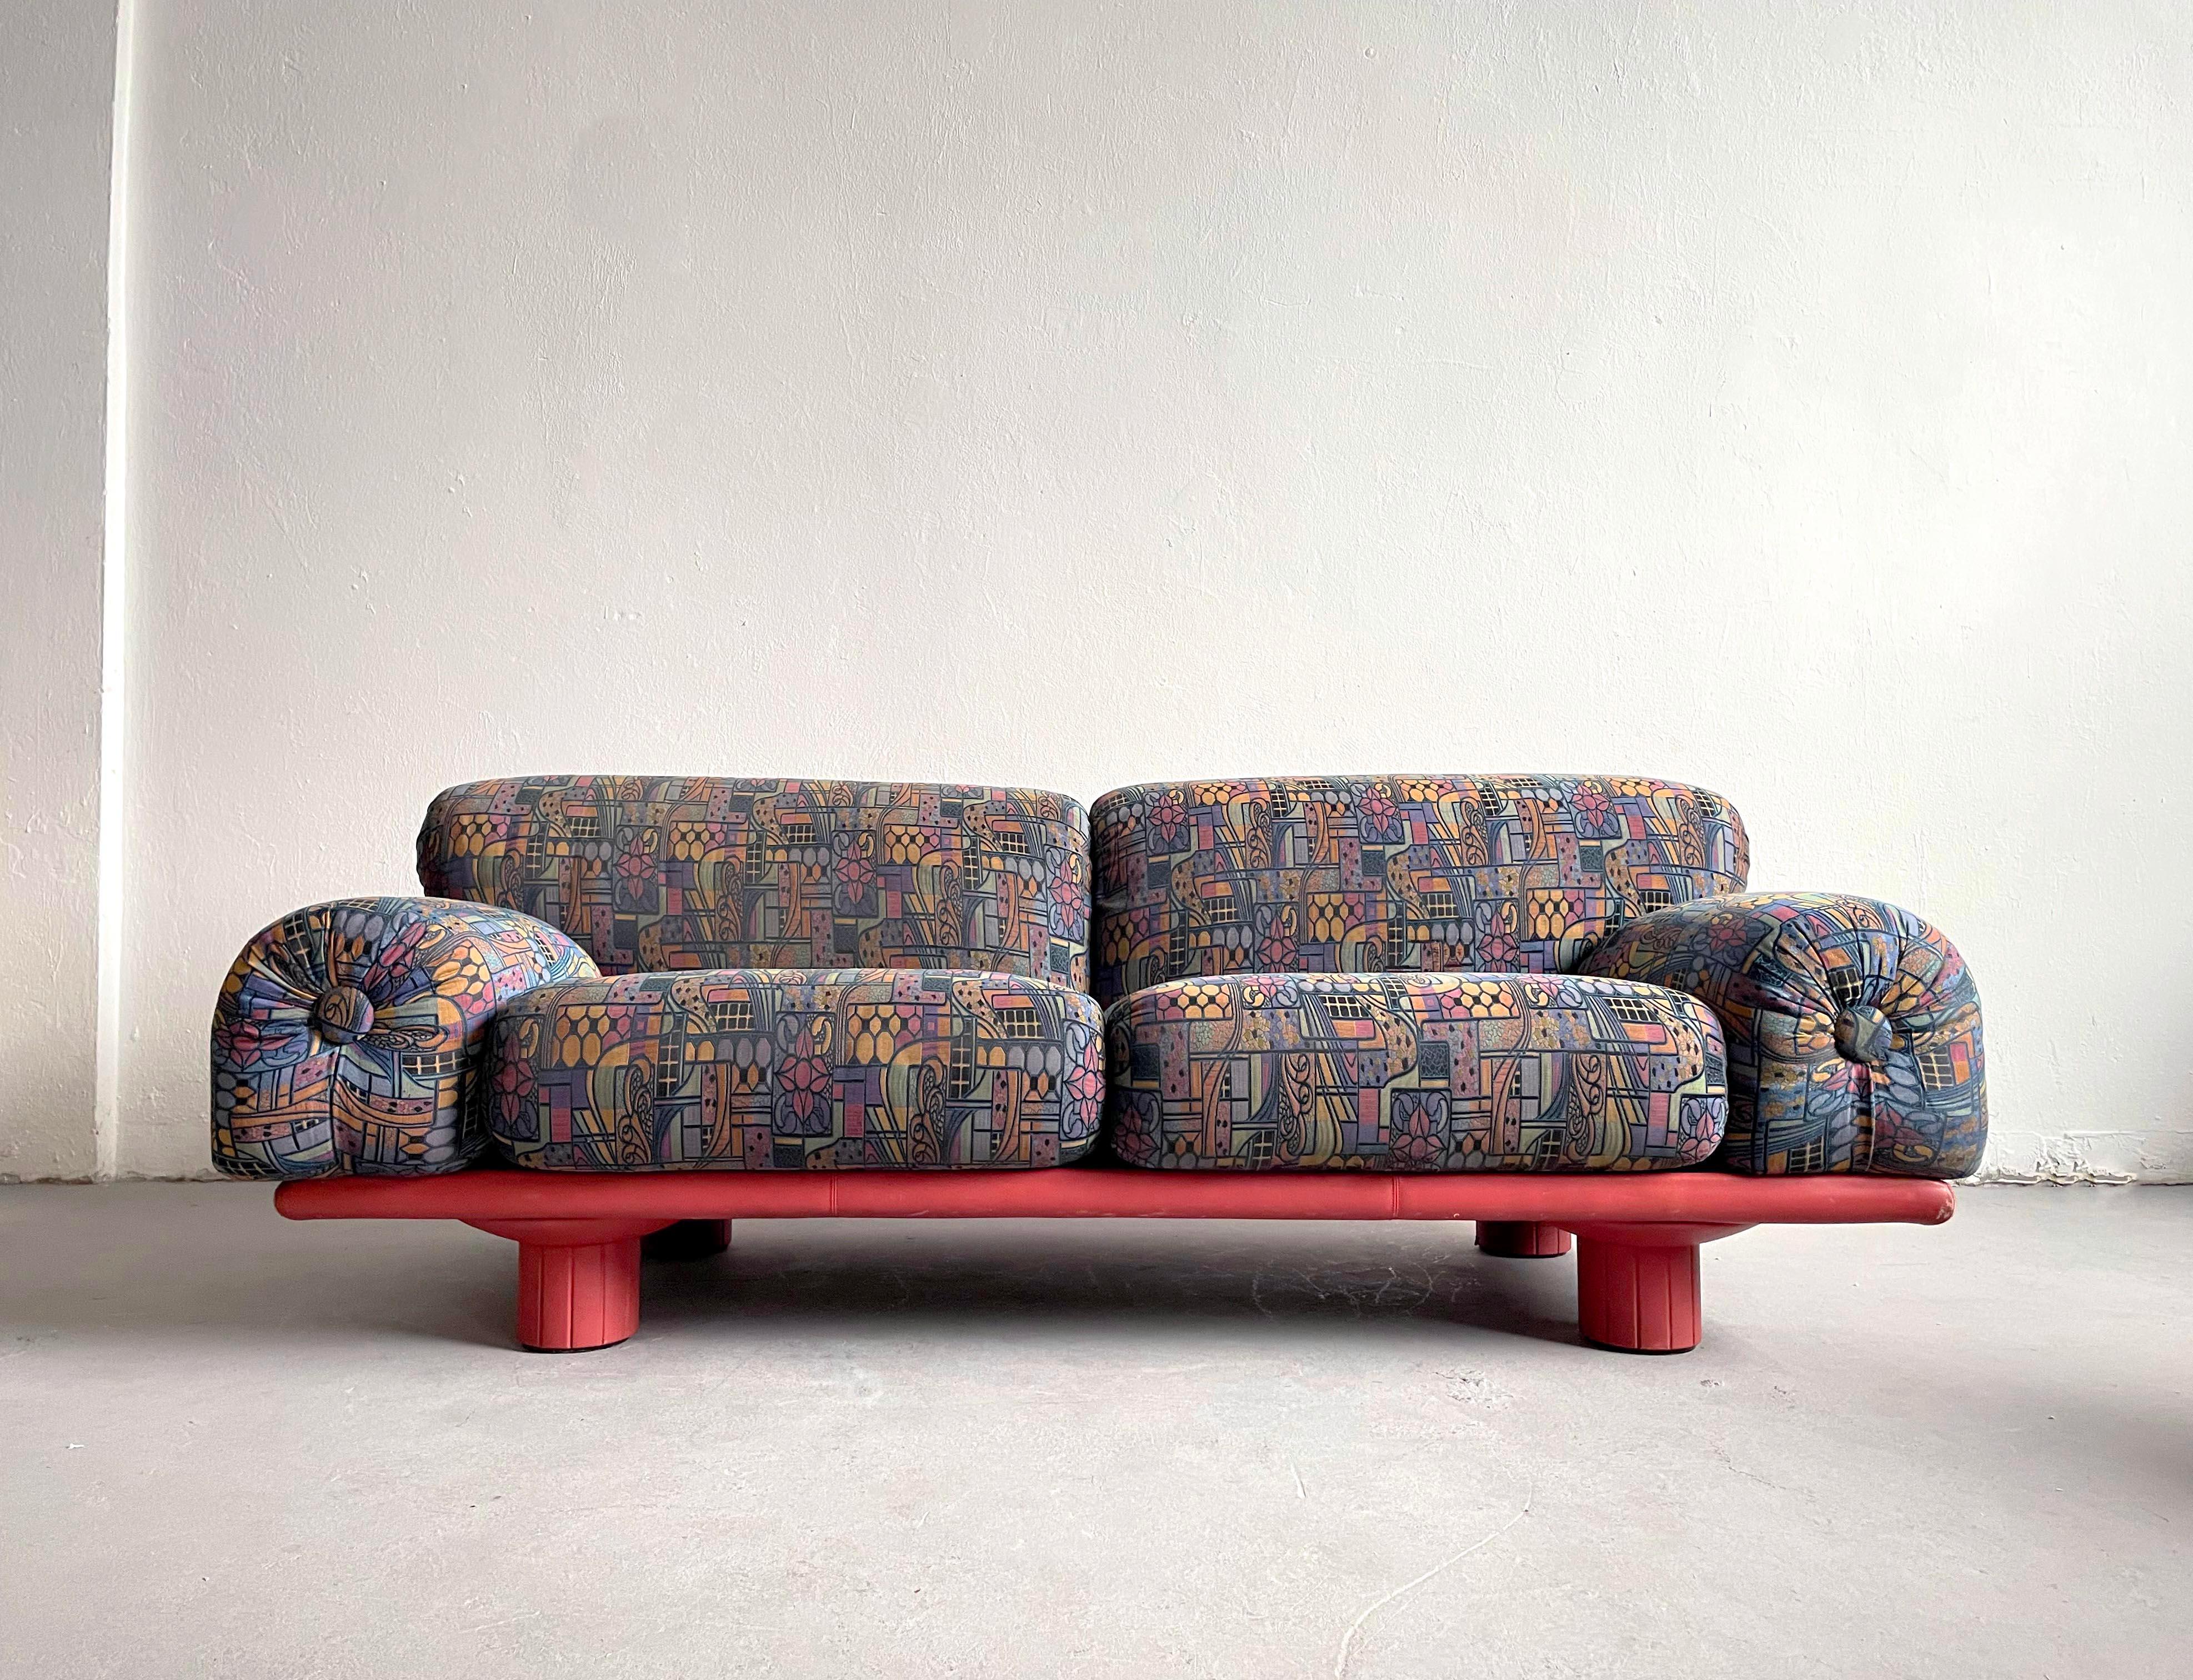 80s couch pattern